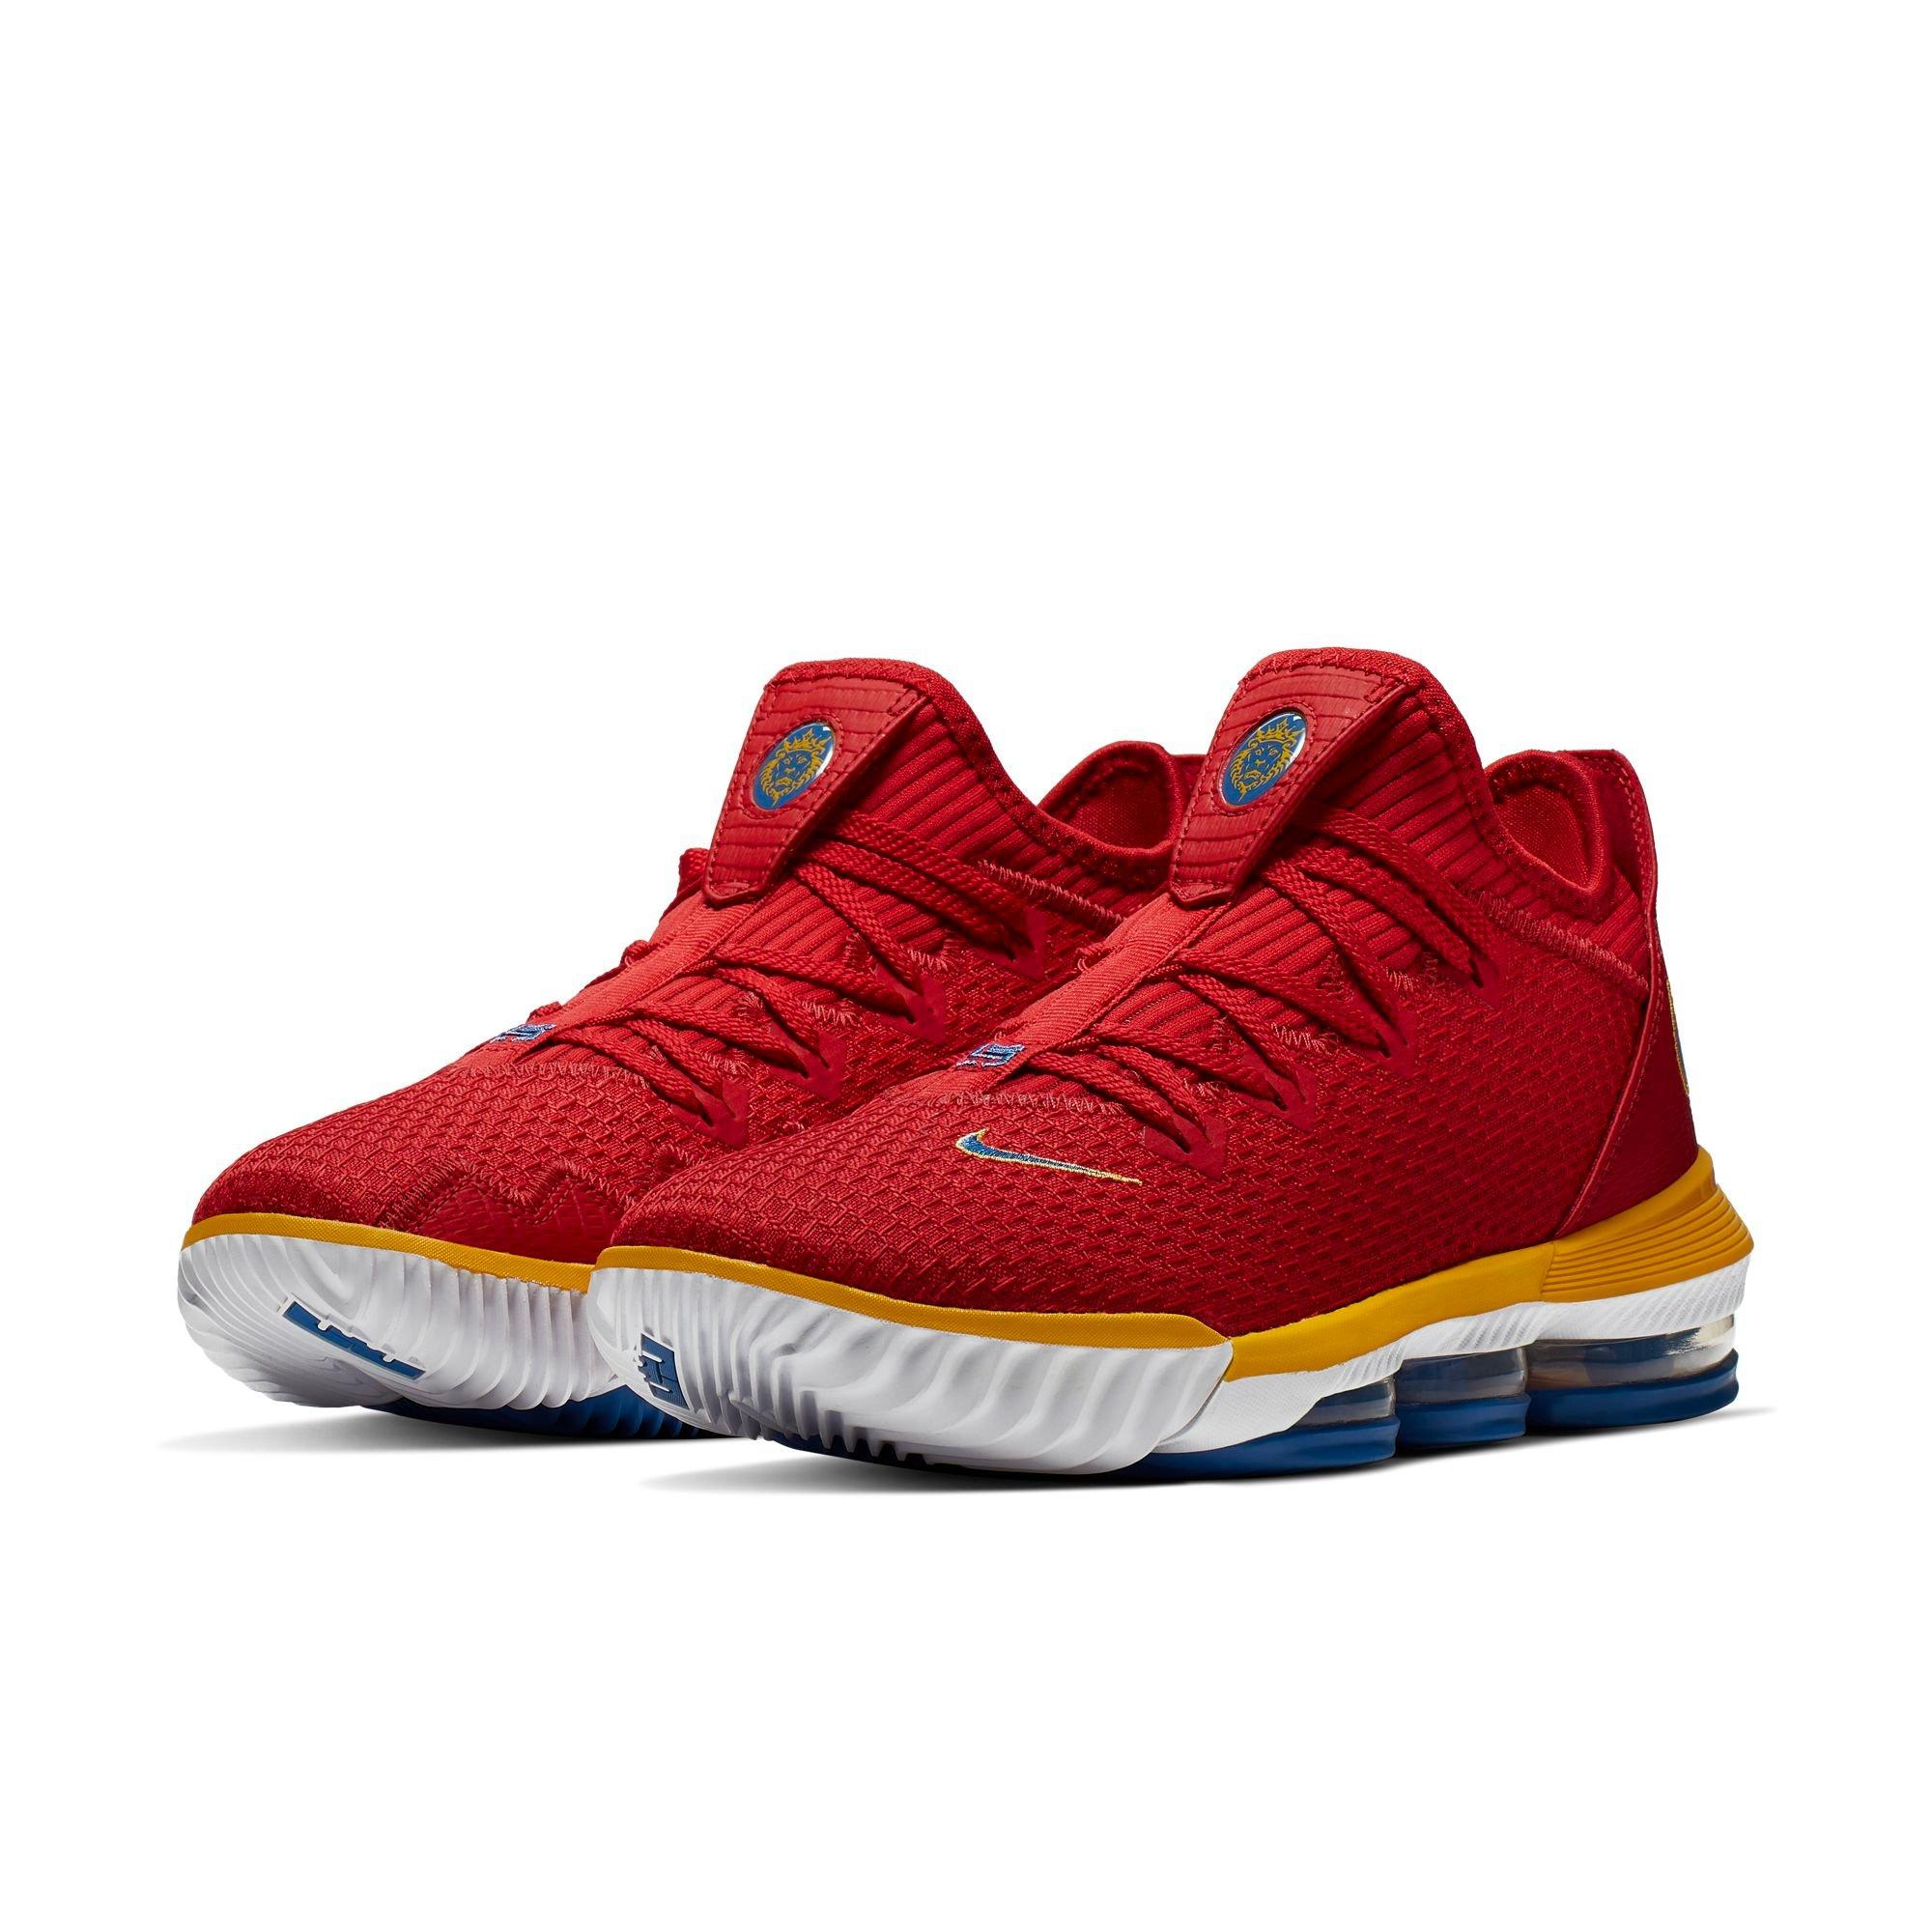 lebron 16 low red yellow